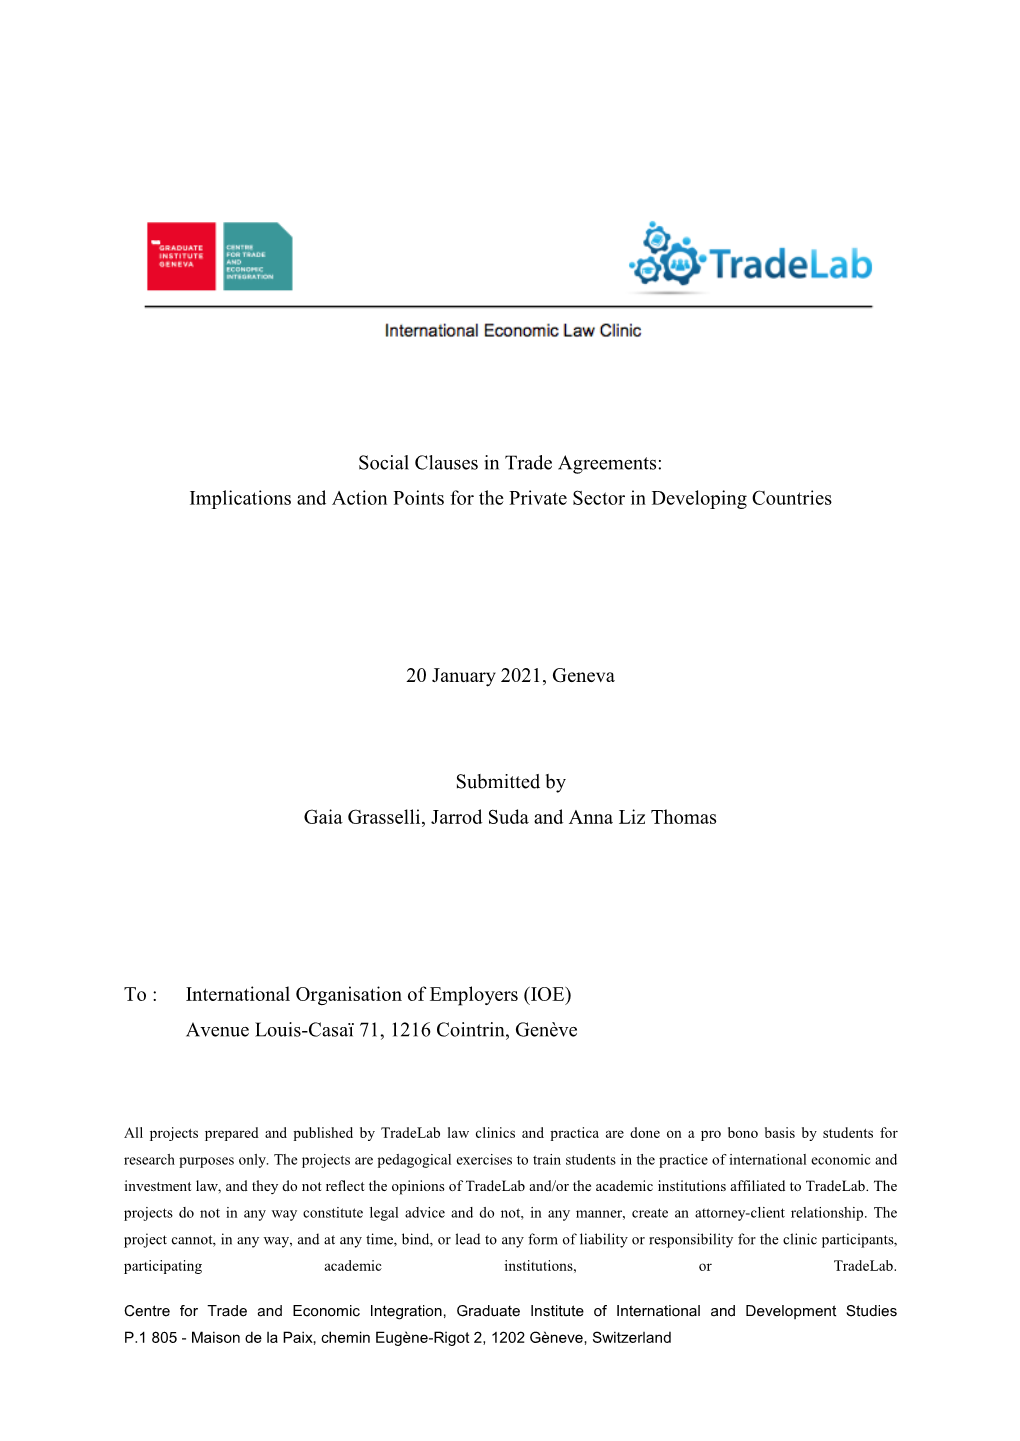 Social Clauses in Trade Agreements: Implications and Action Points for the Private Sector in Developing Countries